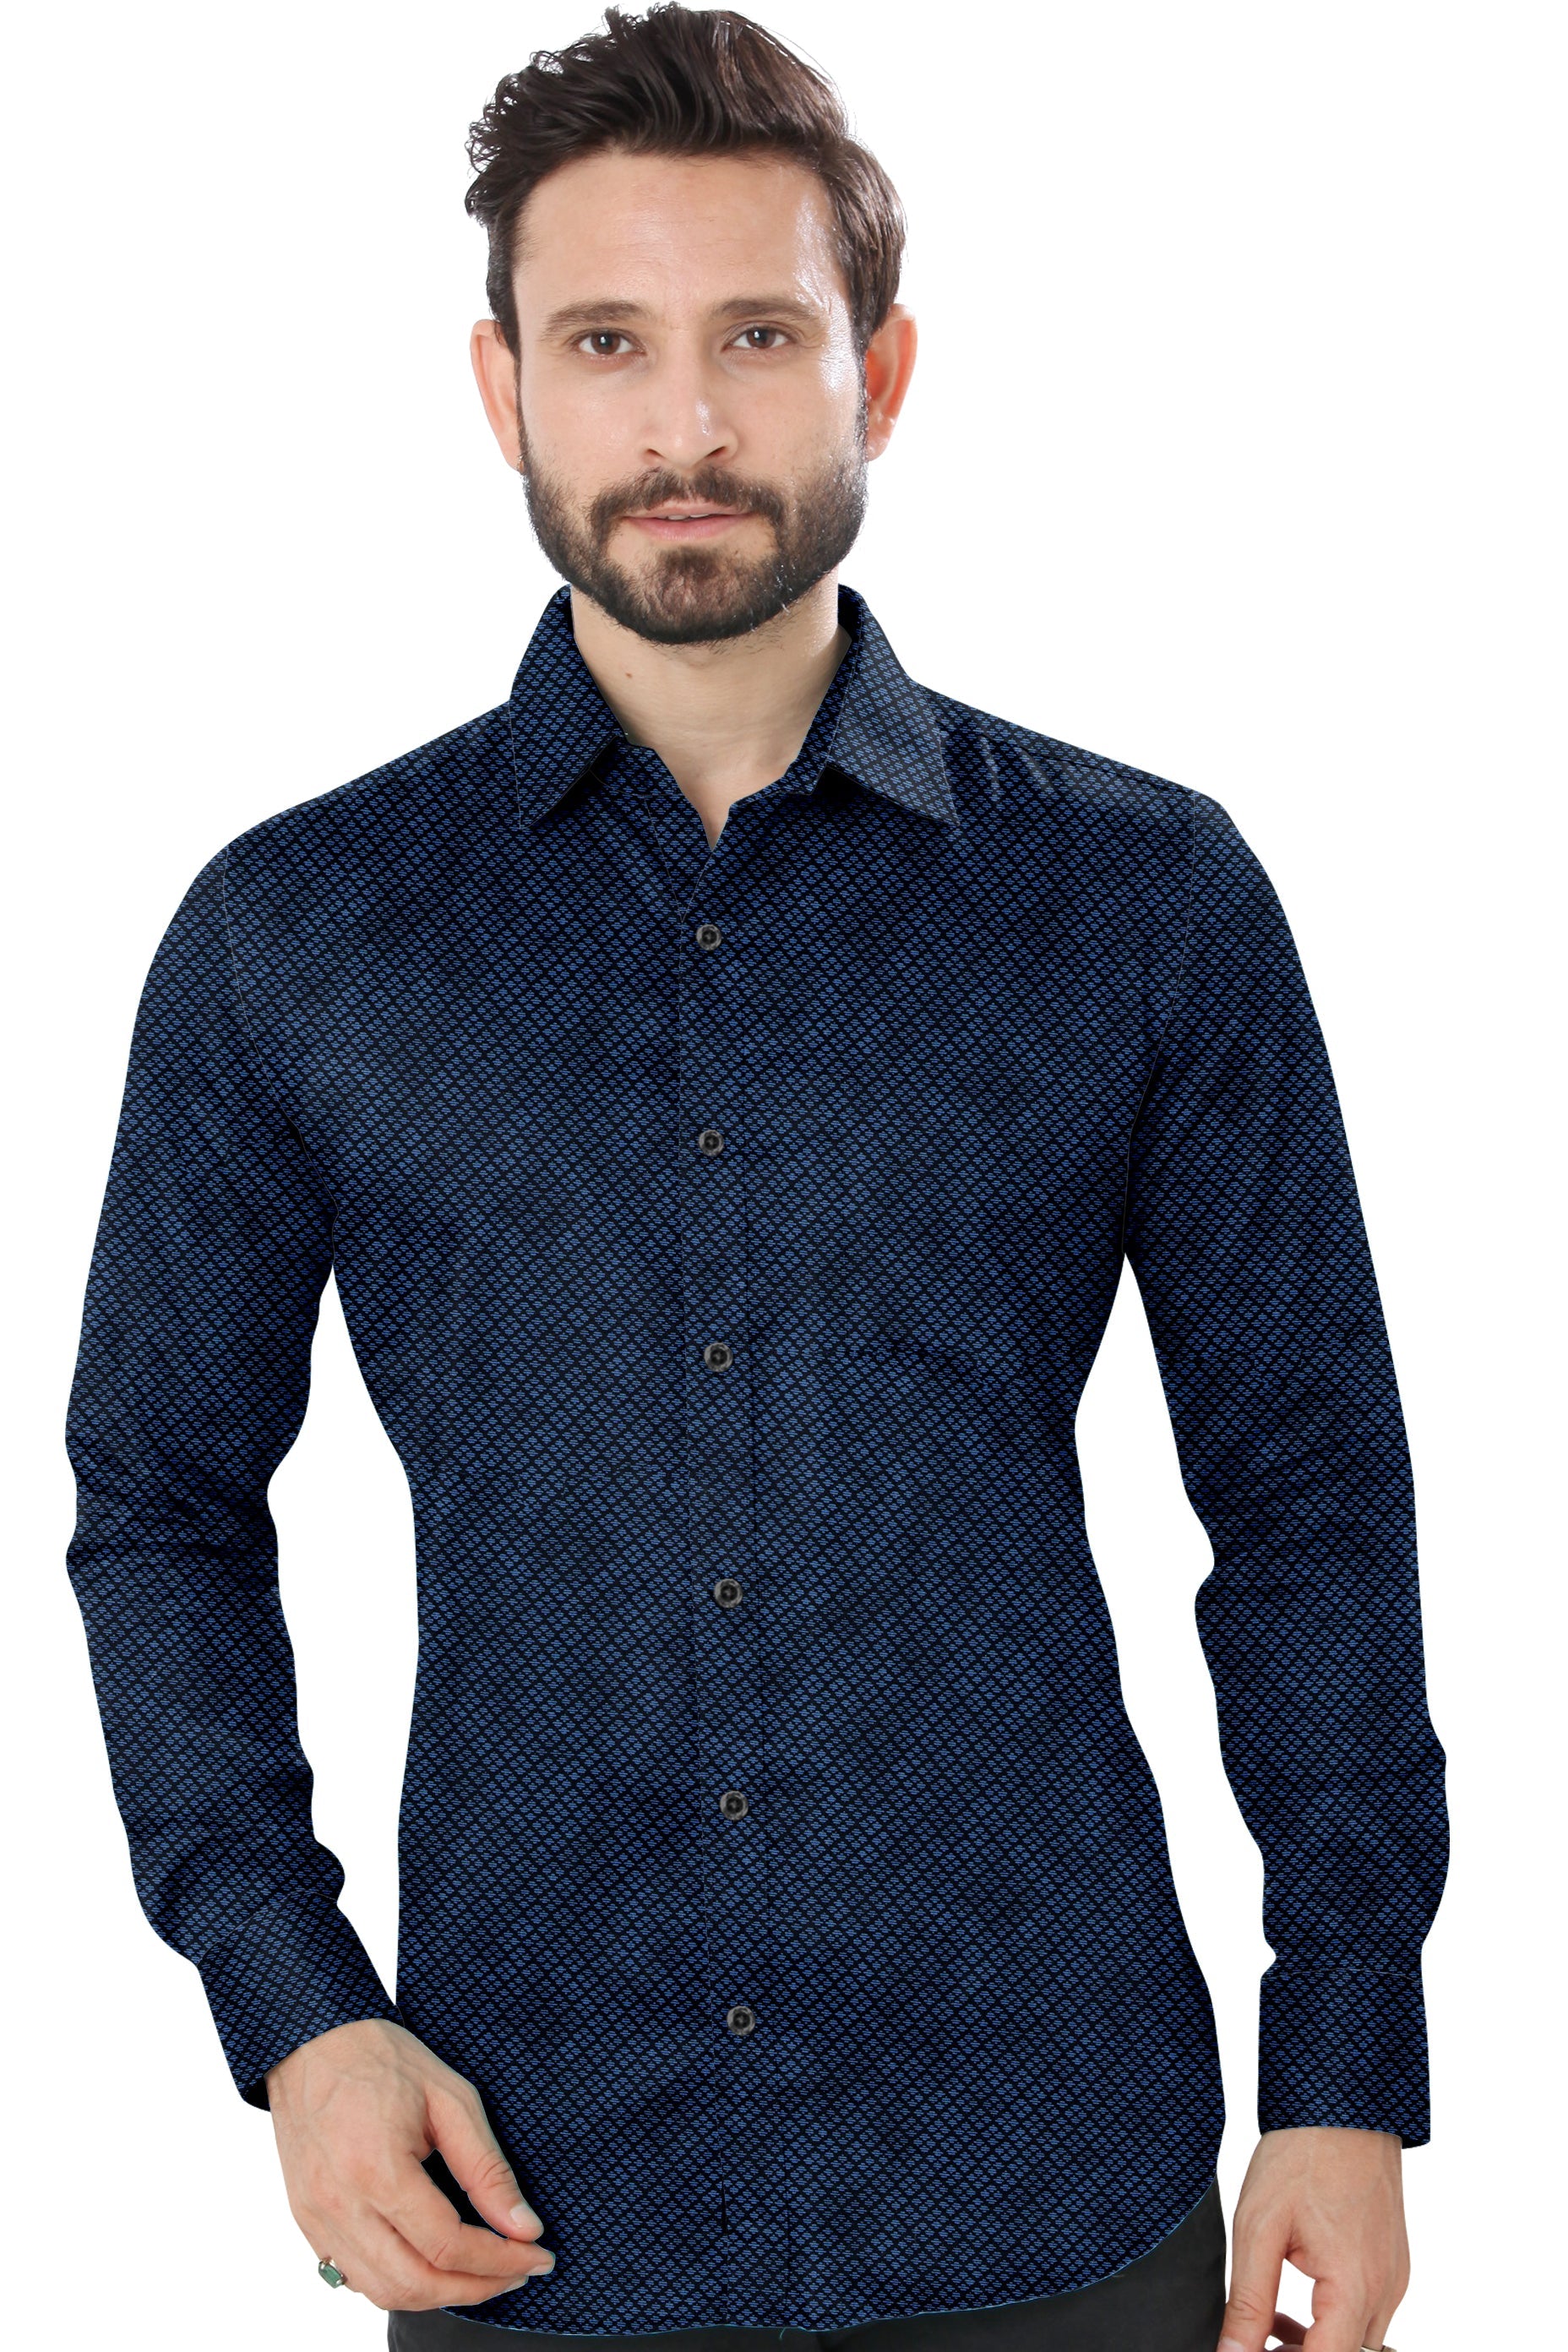 Men's Blue Checked Casual Full Sleeves 100% Cotton 